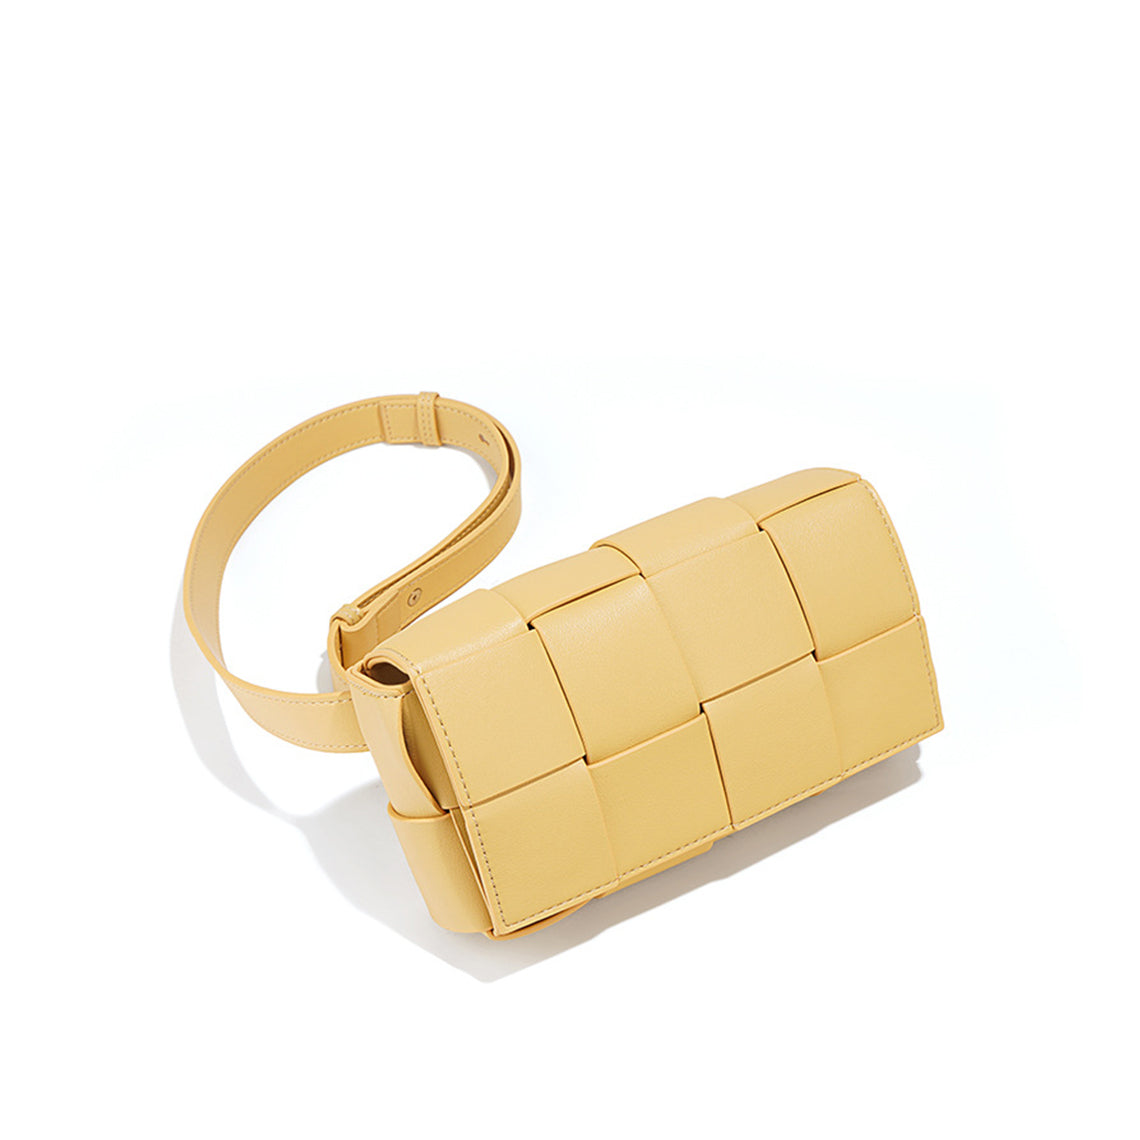 Woven Leather Bag in Cream Yellow | Small Intrecciato Shoulder Bag for Women - POPSEWING™